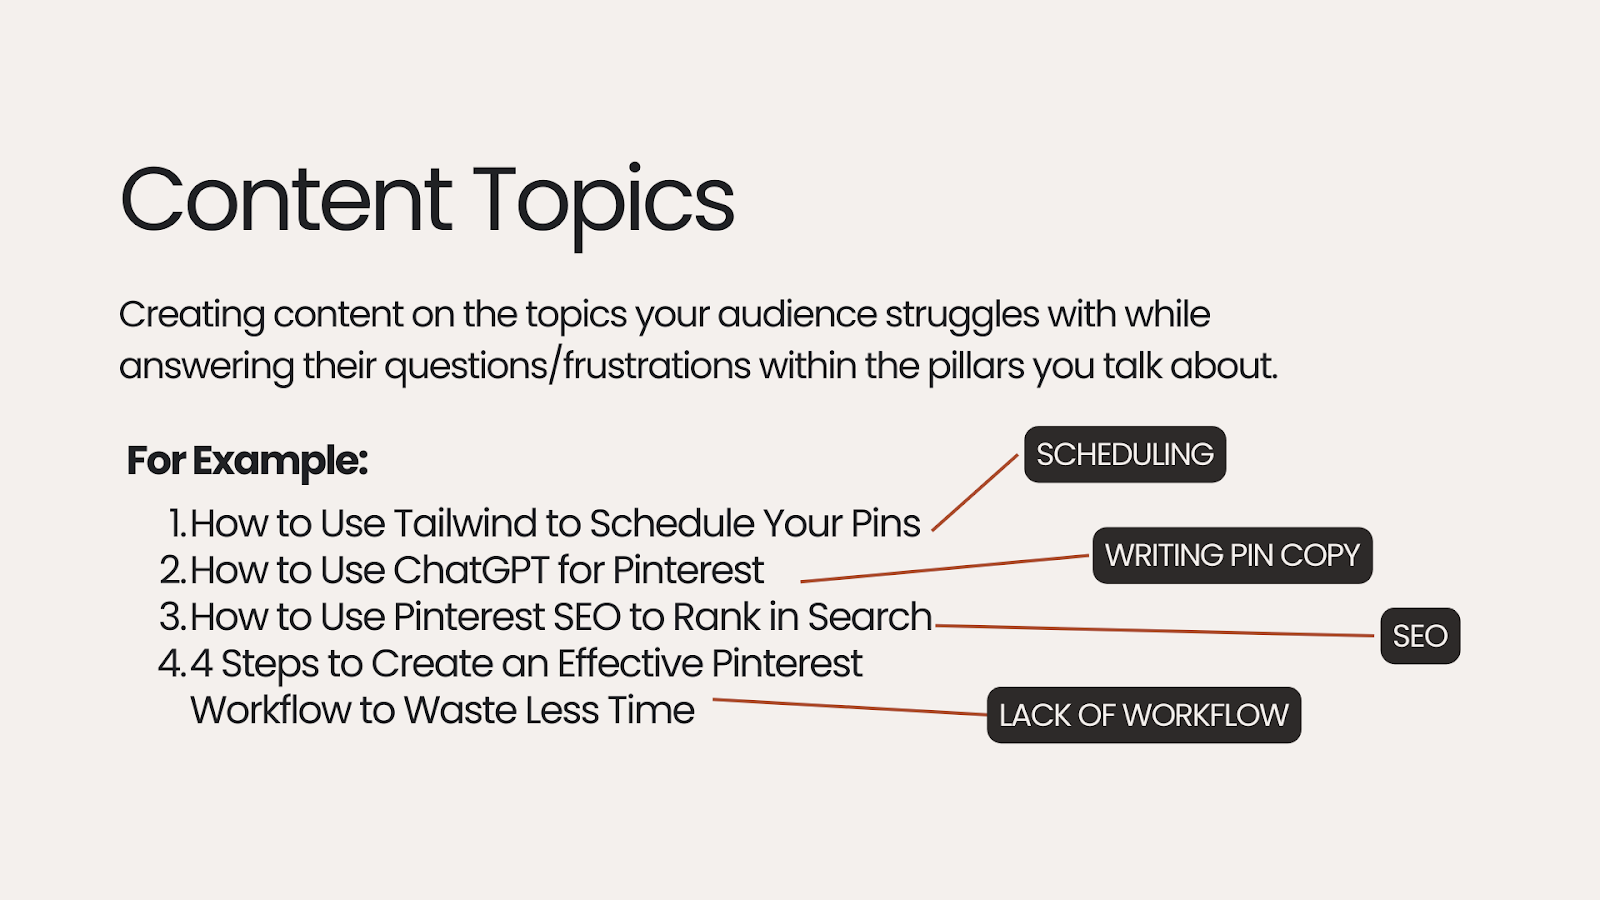 content topics in a content strategy for digital products